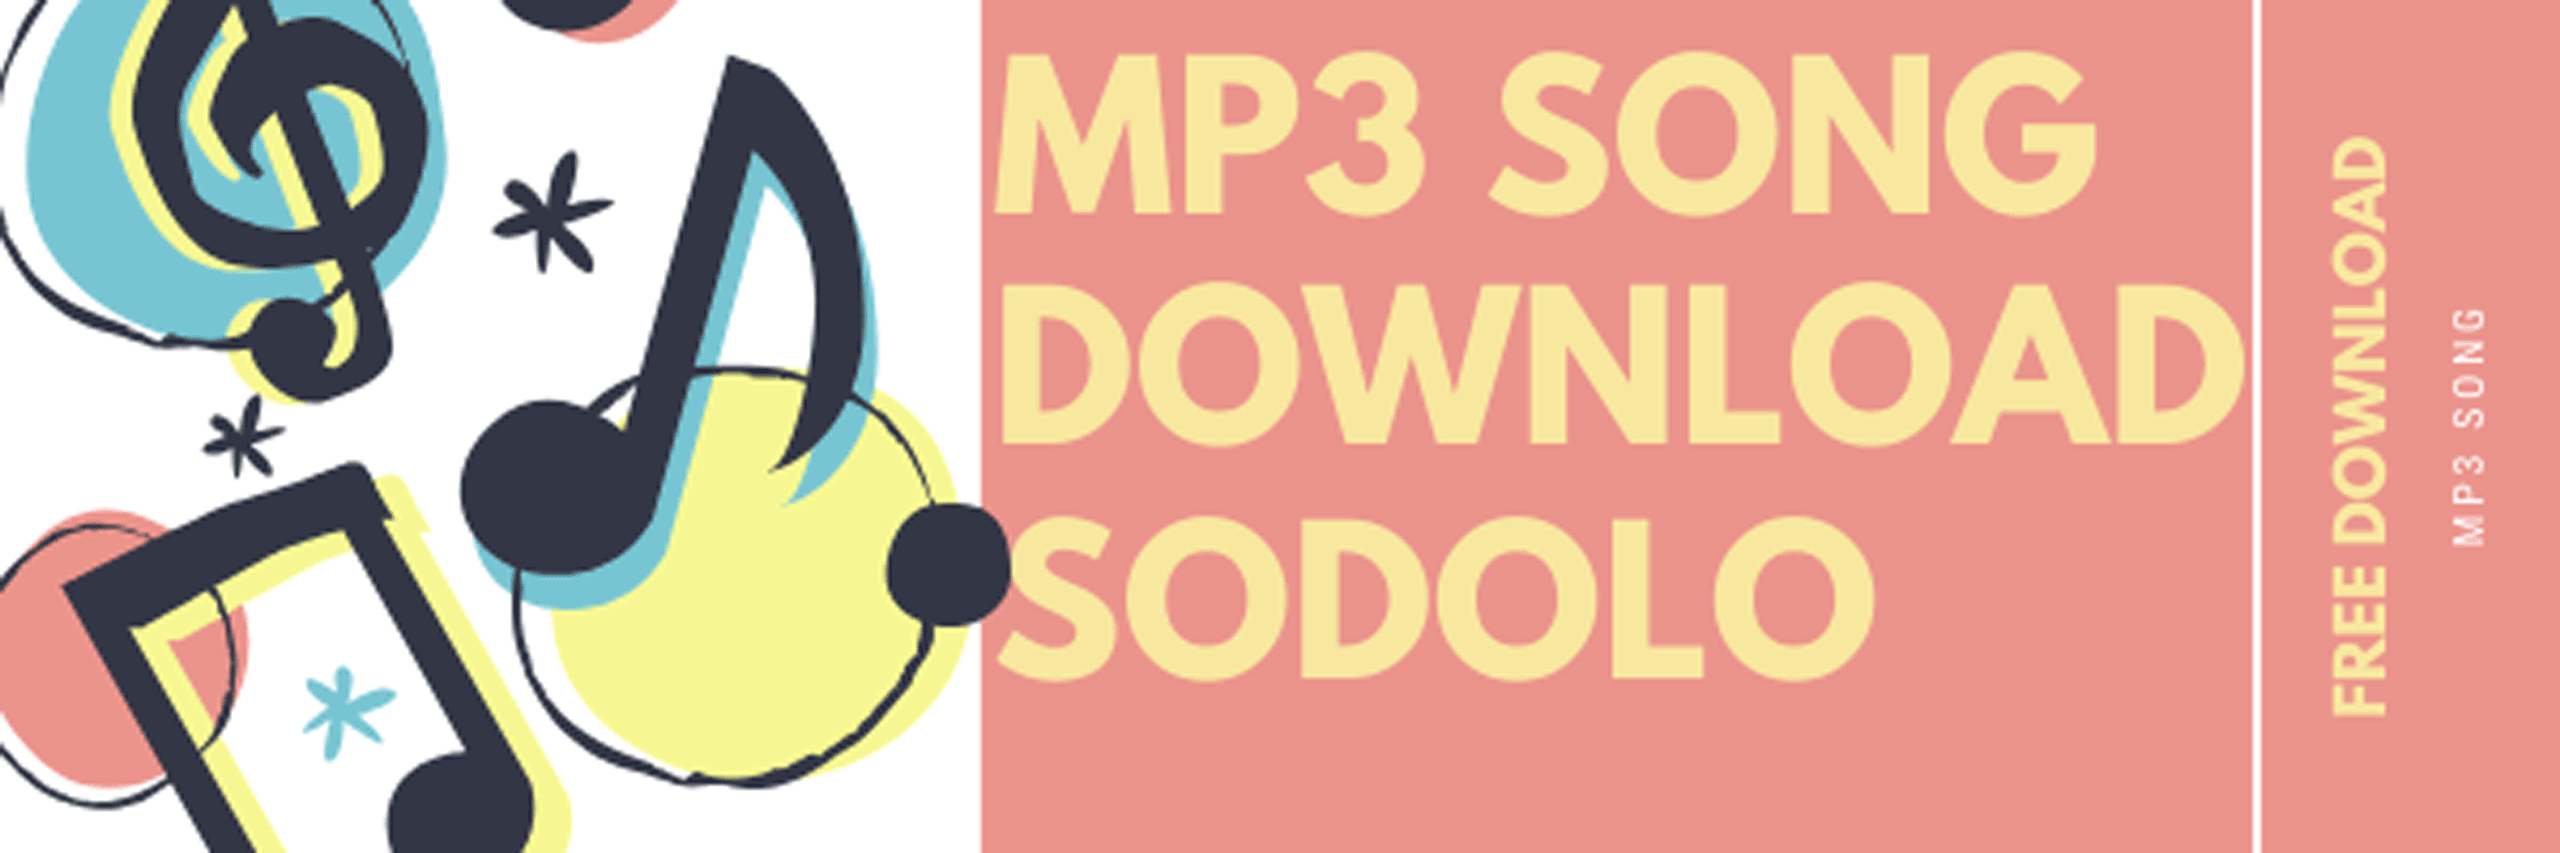 MP3 Song Download Sodolo